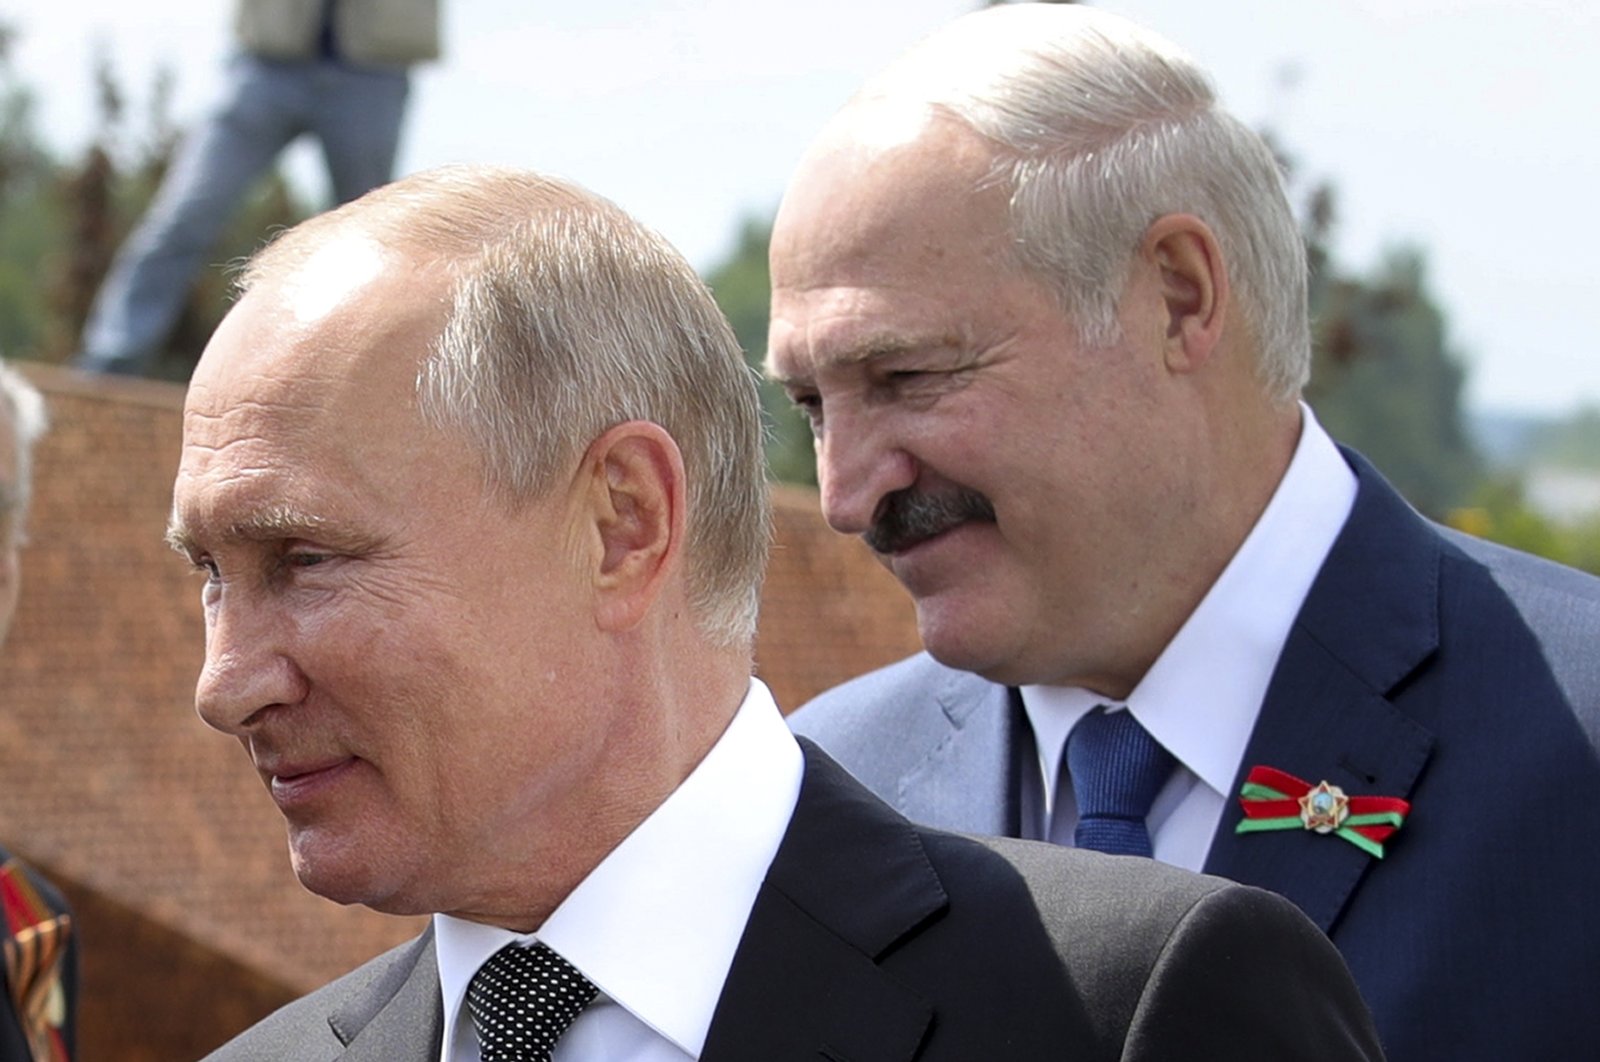 In this June 30, 2020 file photo, Russian President Vladimir Putin (L) and Belarusian President Alexander Lukashenko greet World War II veterans during an opening ceremony of the monument in honor of the World War II Red Army, in the village of Khoroshevo, Russia. (AP Photo)